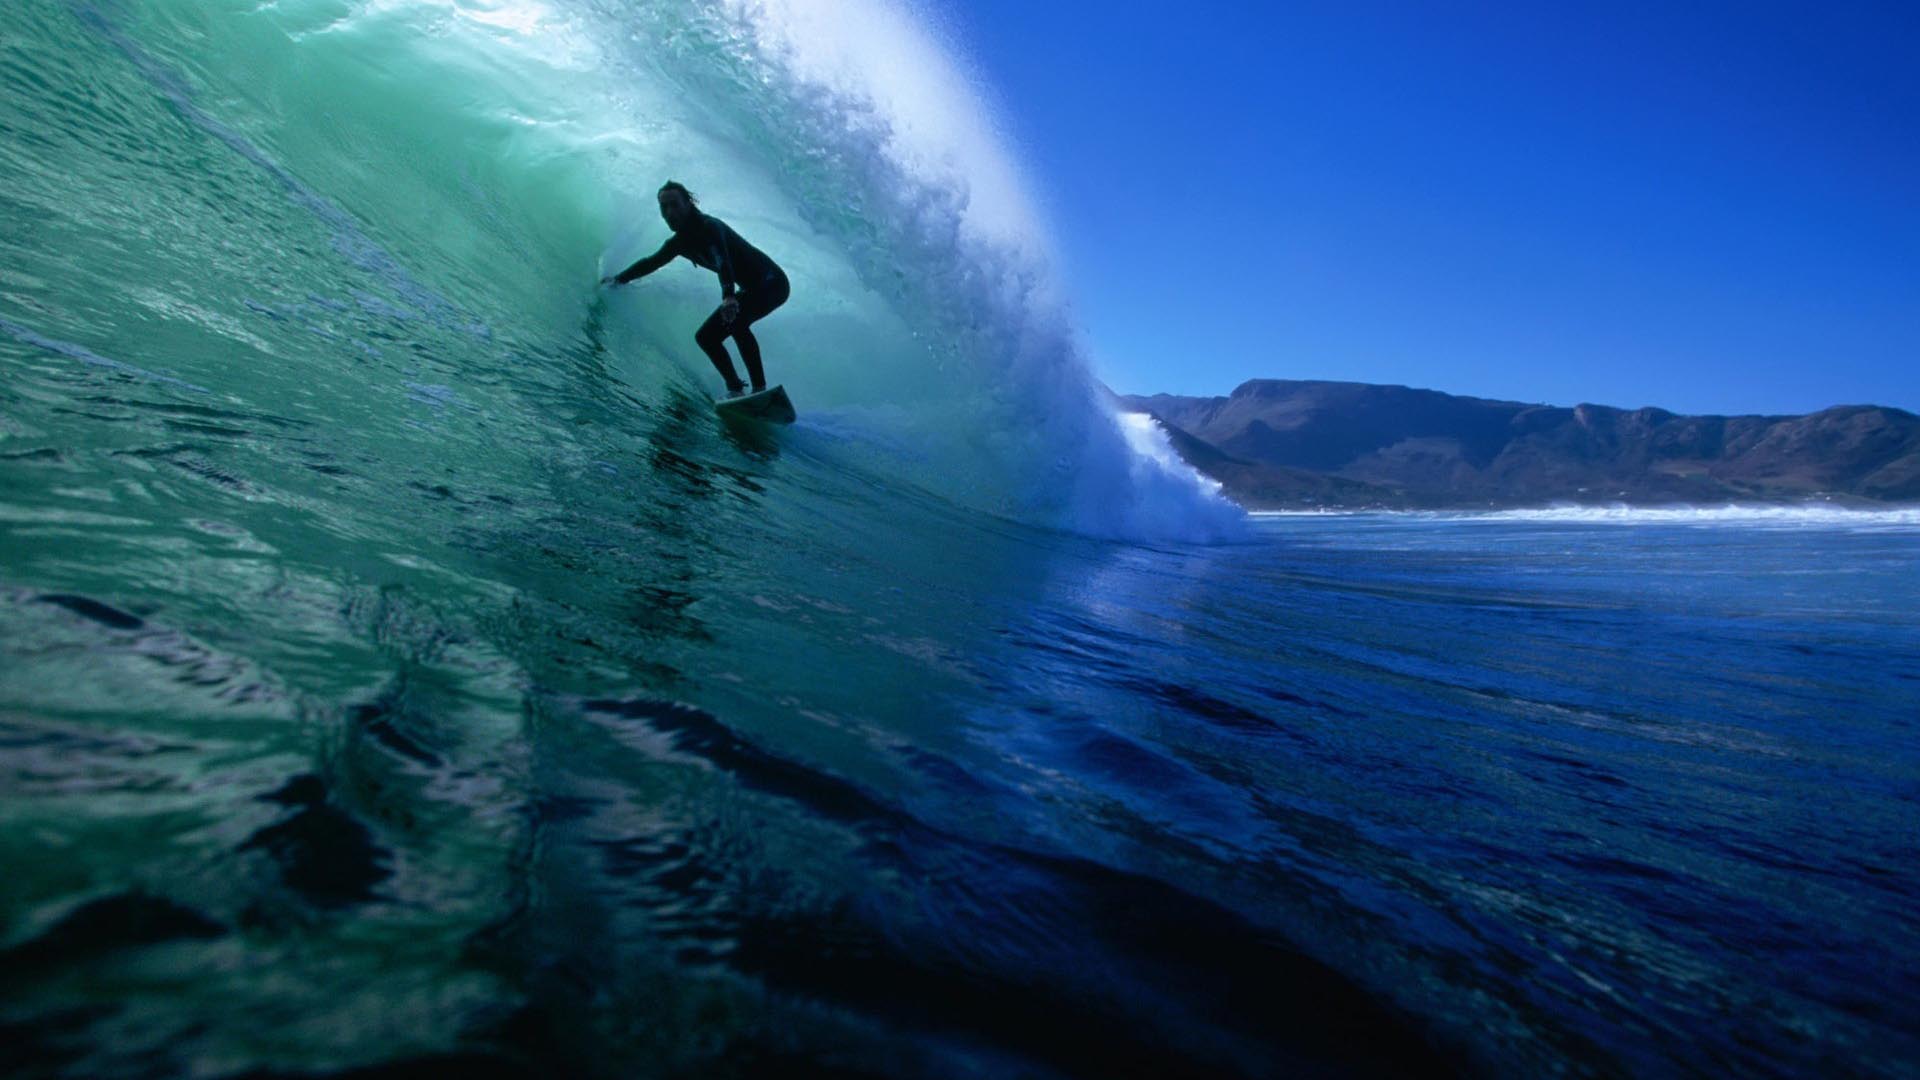 Surfing Big Wave HD Wallpaper: Large Wall Paper